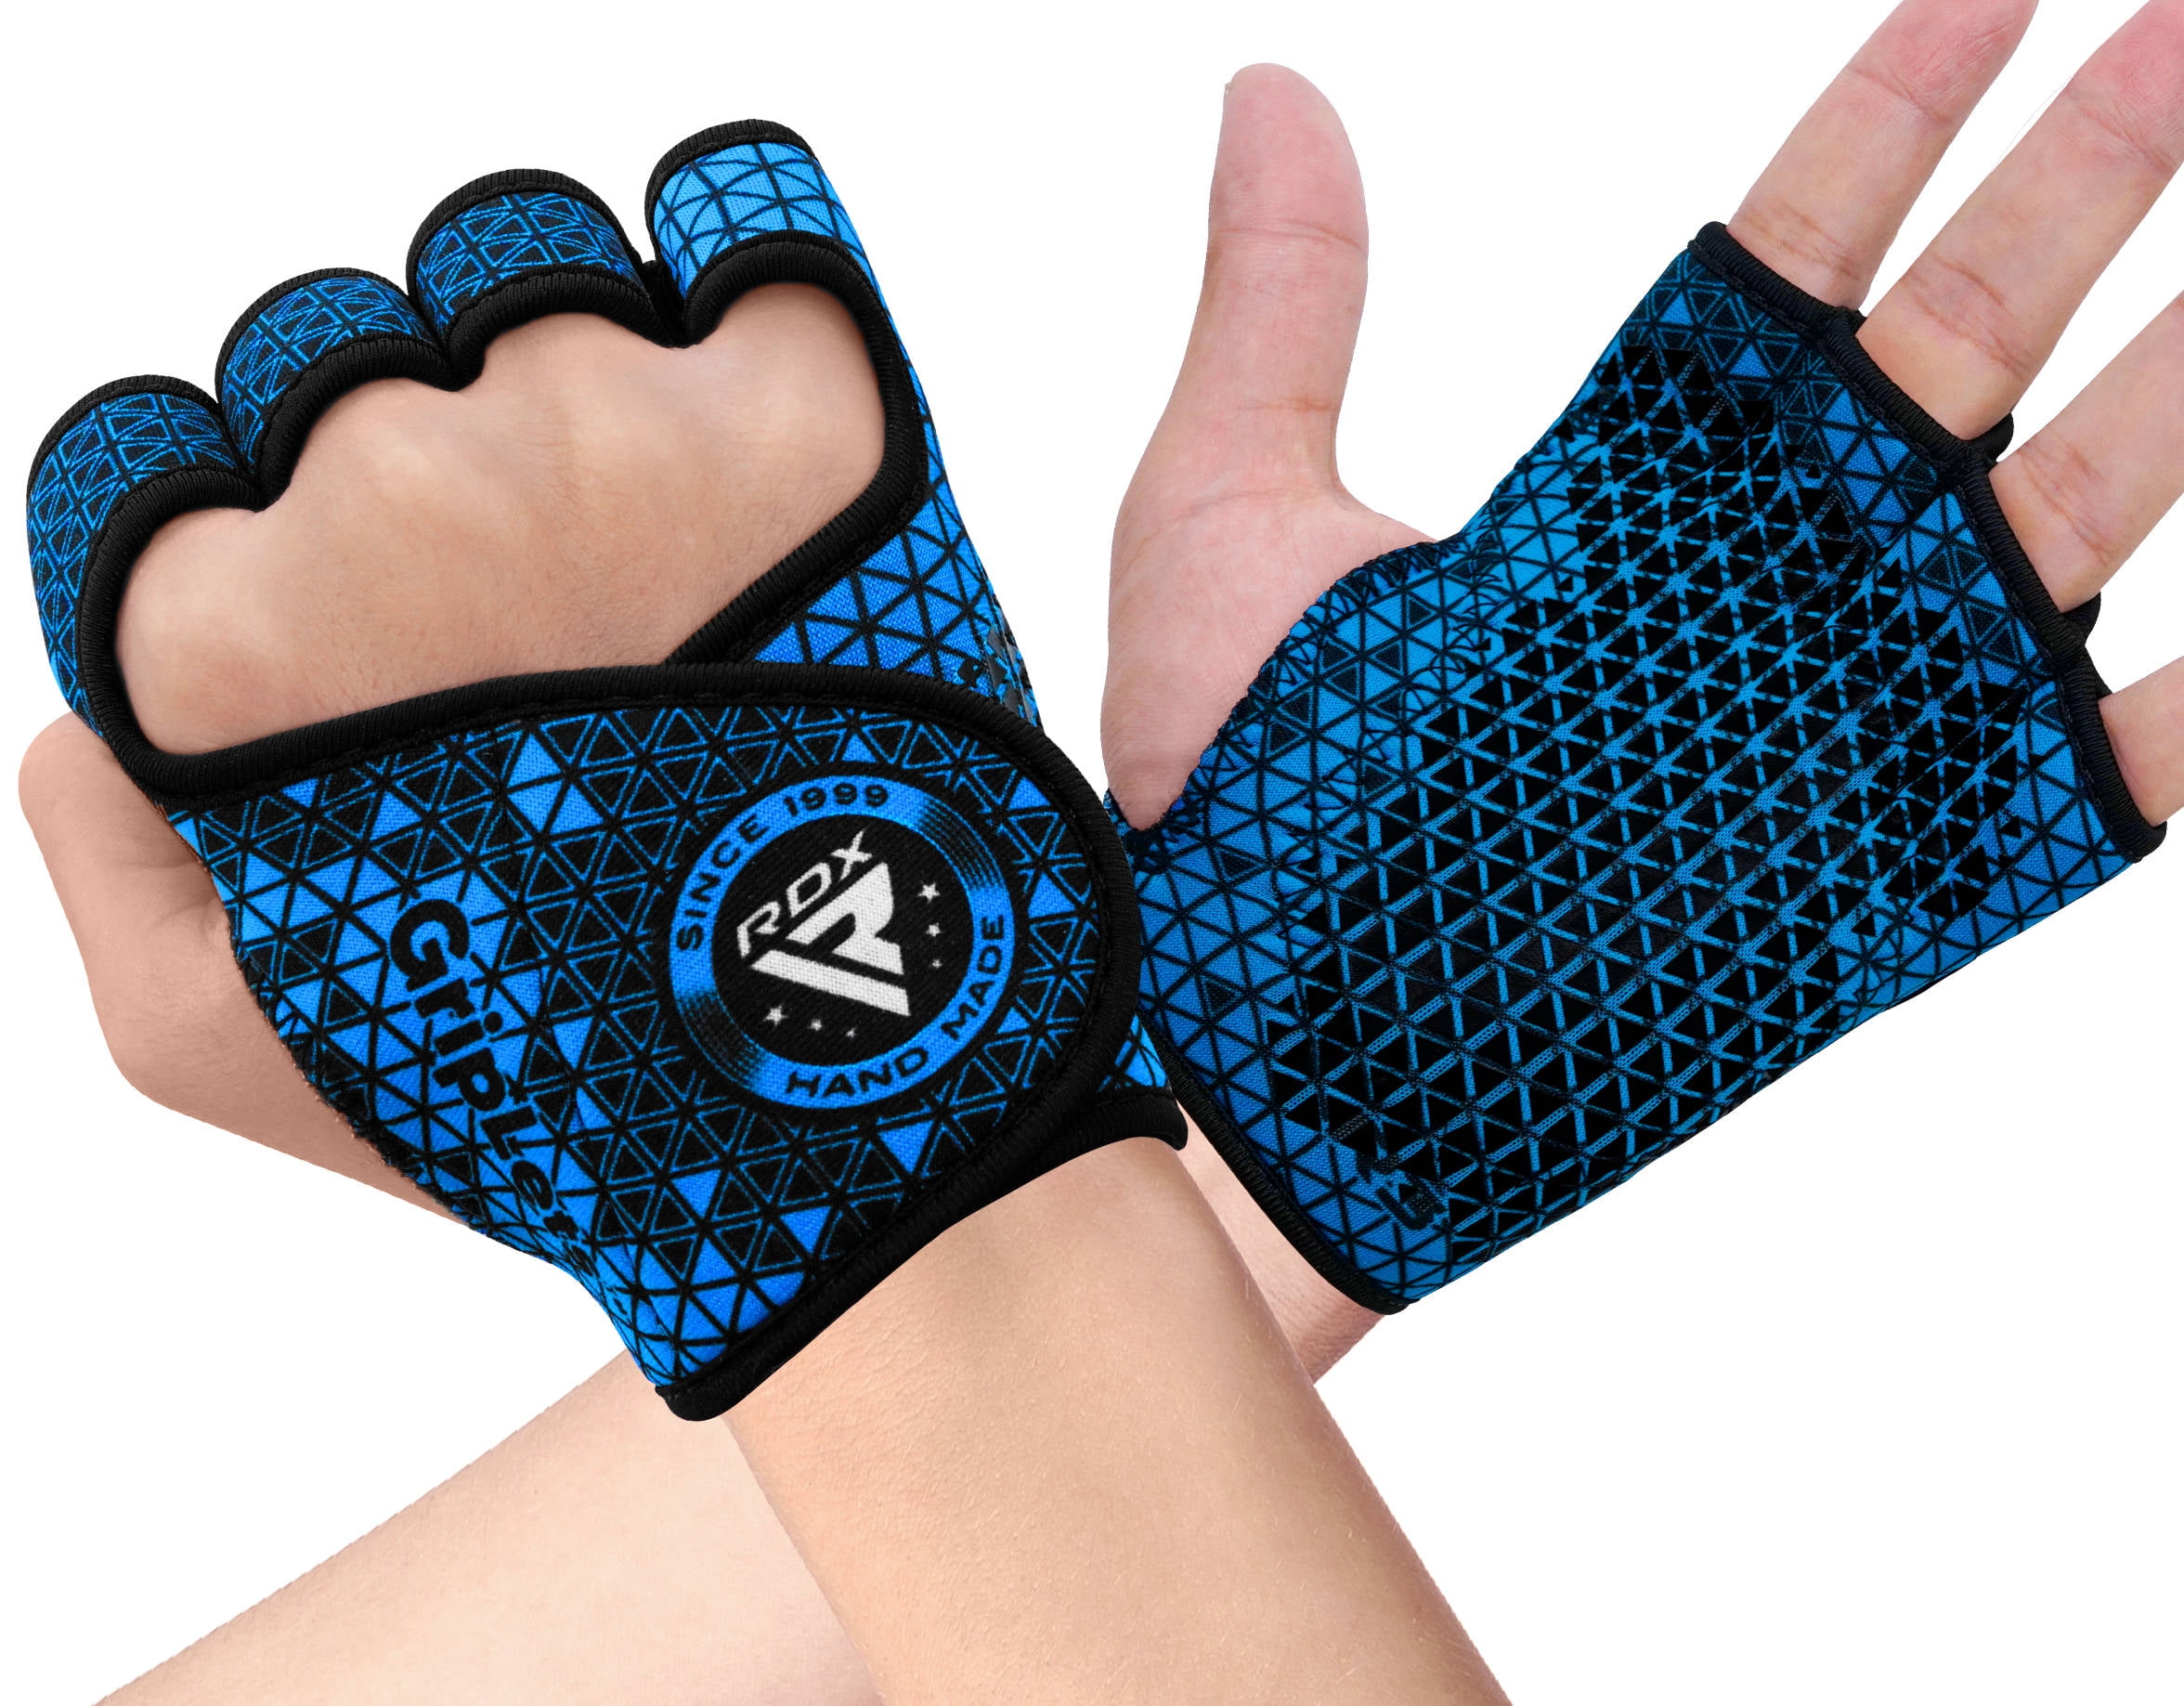 Gymnastics Grips & Crossfit Gloves Grants A Rock Solid Grip & Shield That Saves Your Precious Skin from Falling Off Your Hands Bunch Up or Slide Safe Crossfit Grips Finger Hole Design Will NOT Tear